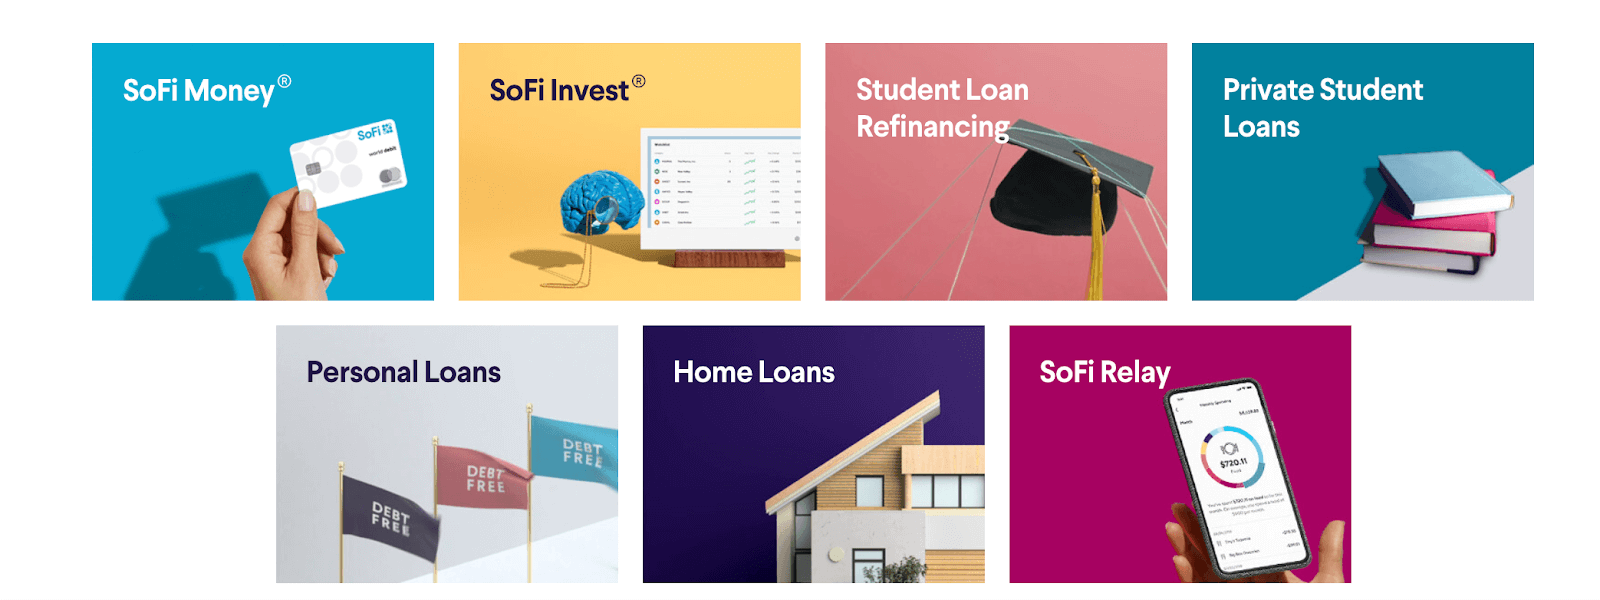 SoFi Personal Loans and More 2020 Review